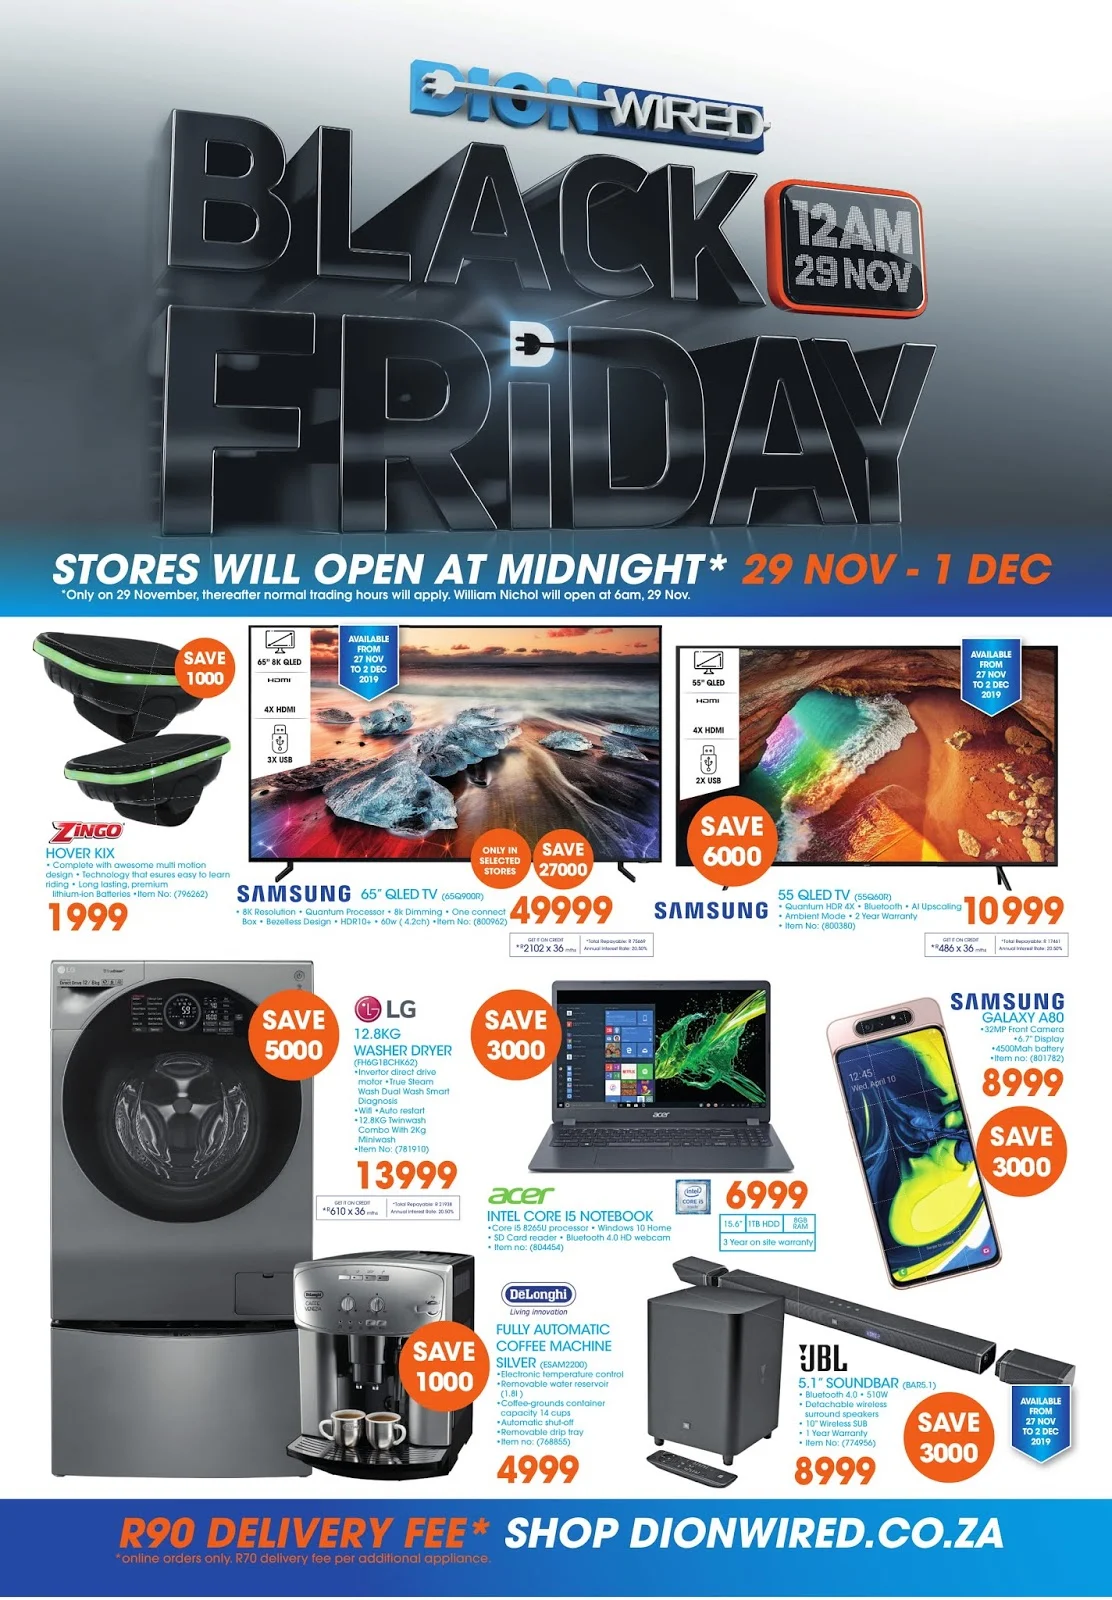 Dion Wired Black Friday Deals Page 1